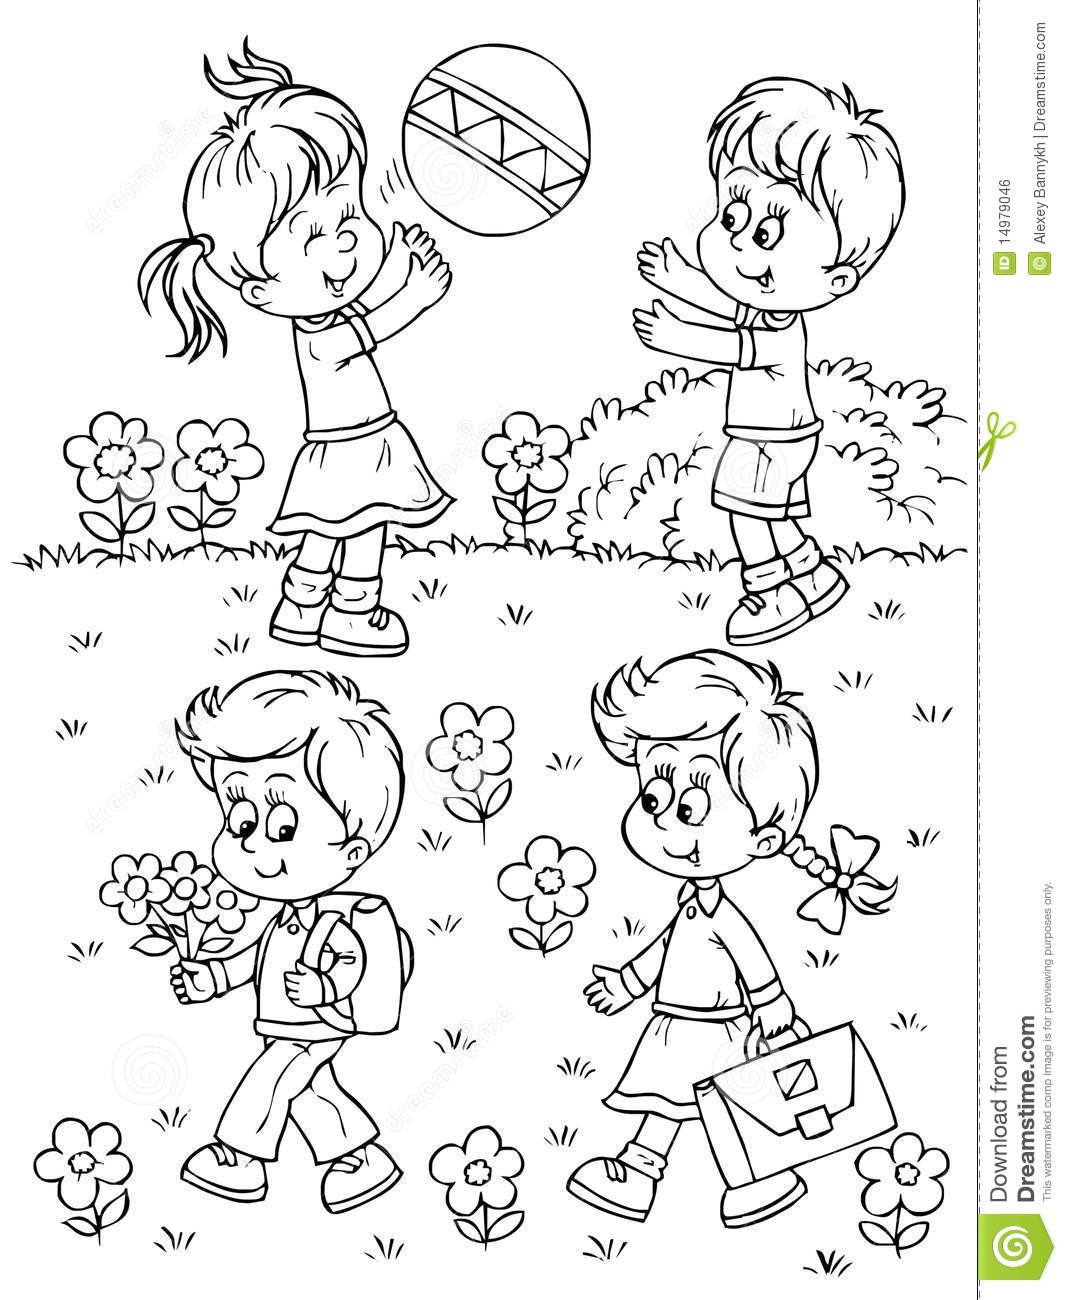 Kids Playing Coloring Page
 Playing children stock illustration Illustration of